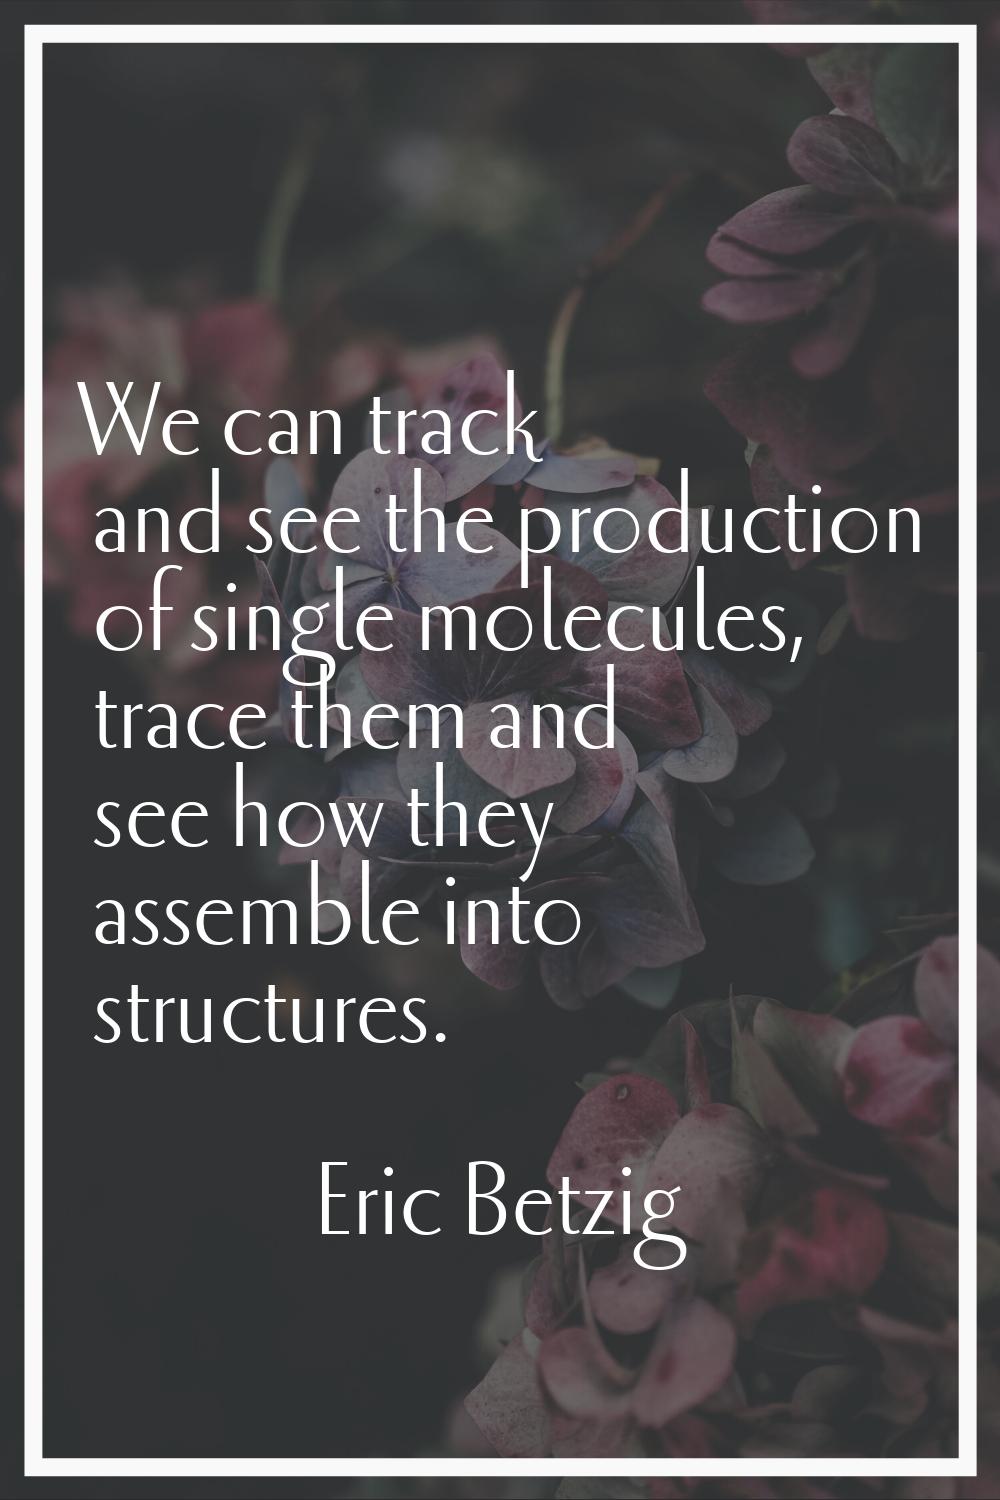 We can track and see the production of single molecules, trace them and see how they assemble into 